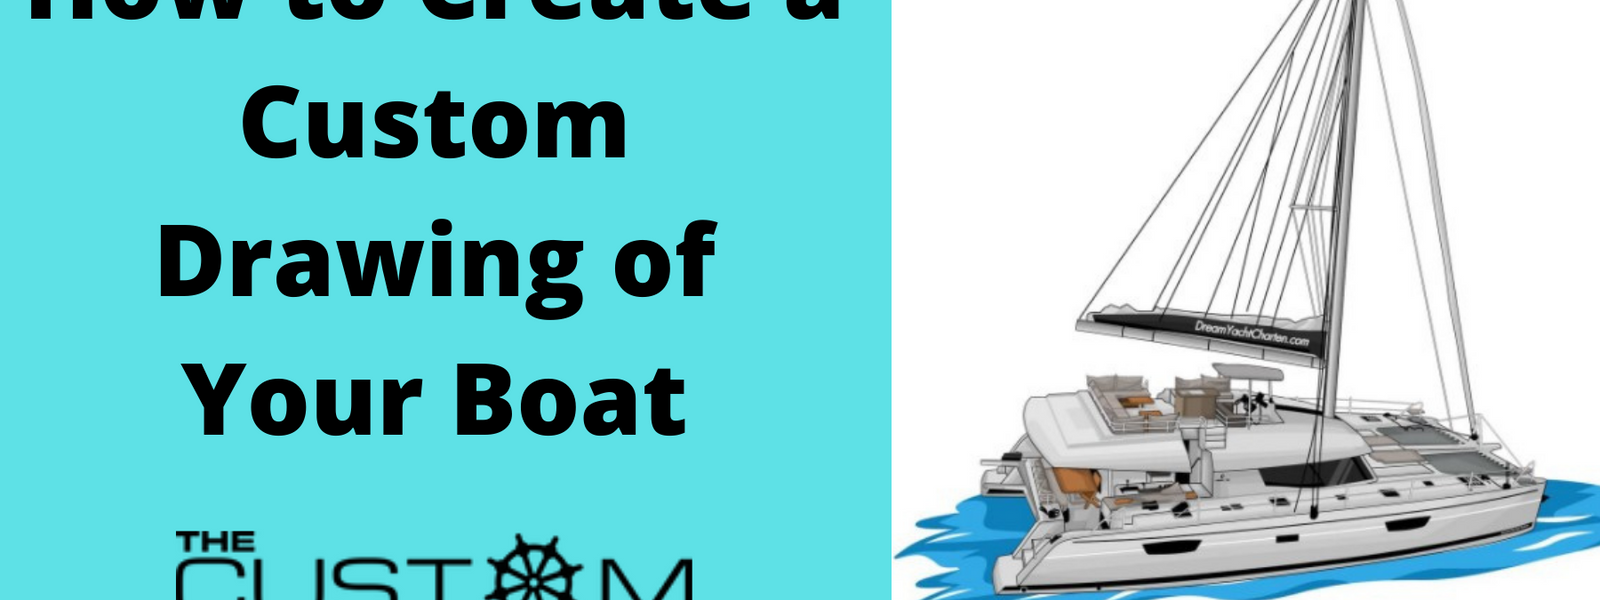 How to Create a Custom Drawing of Your Boat